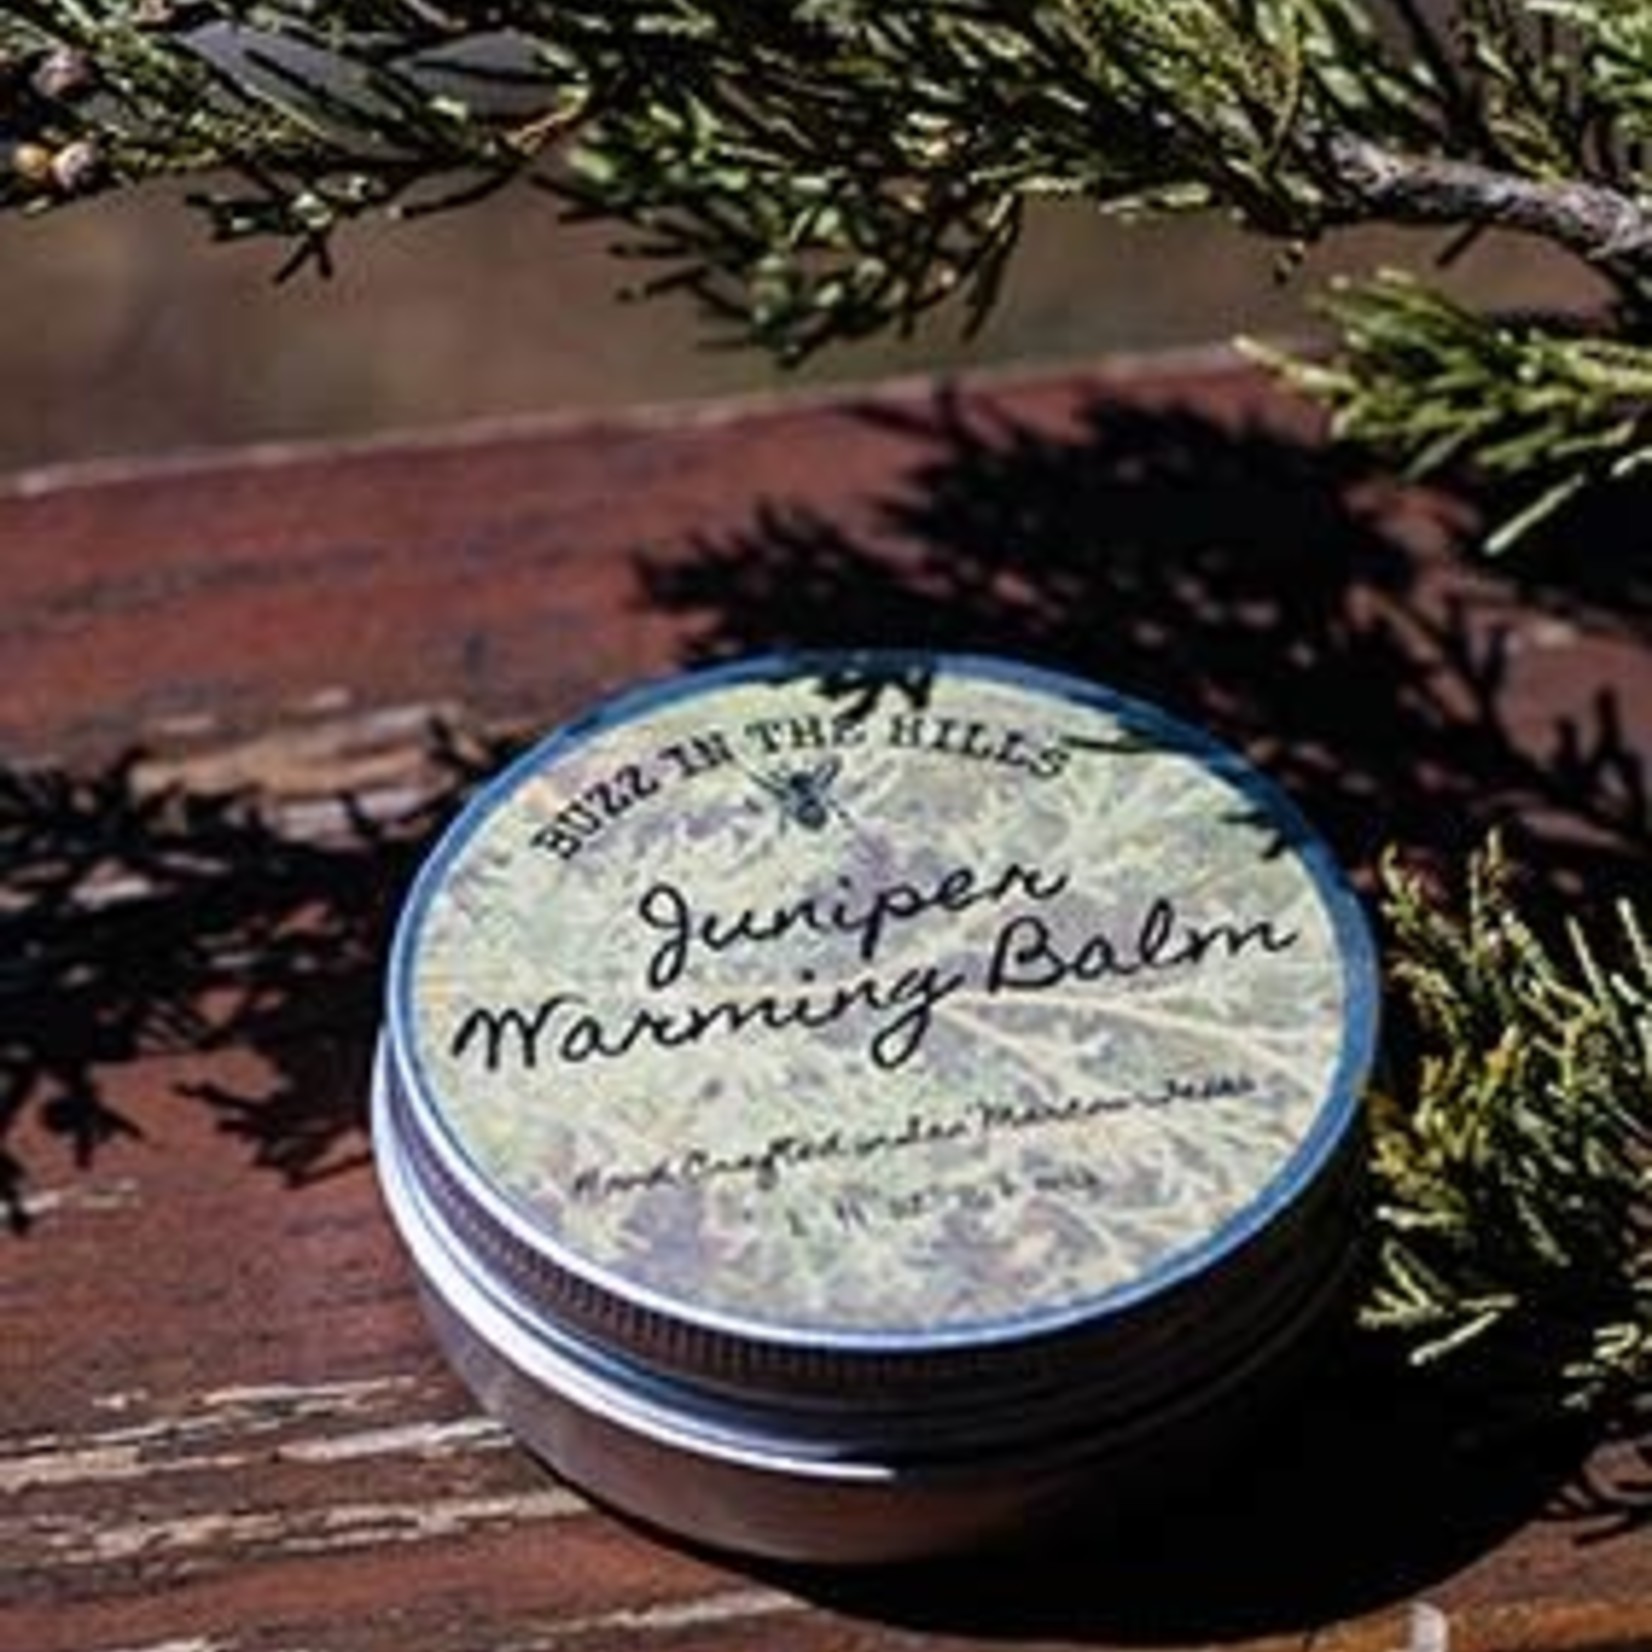 Buzz in the Hills Juniper Warming Balm by Buzz in the Hills